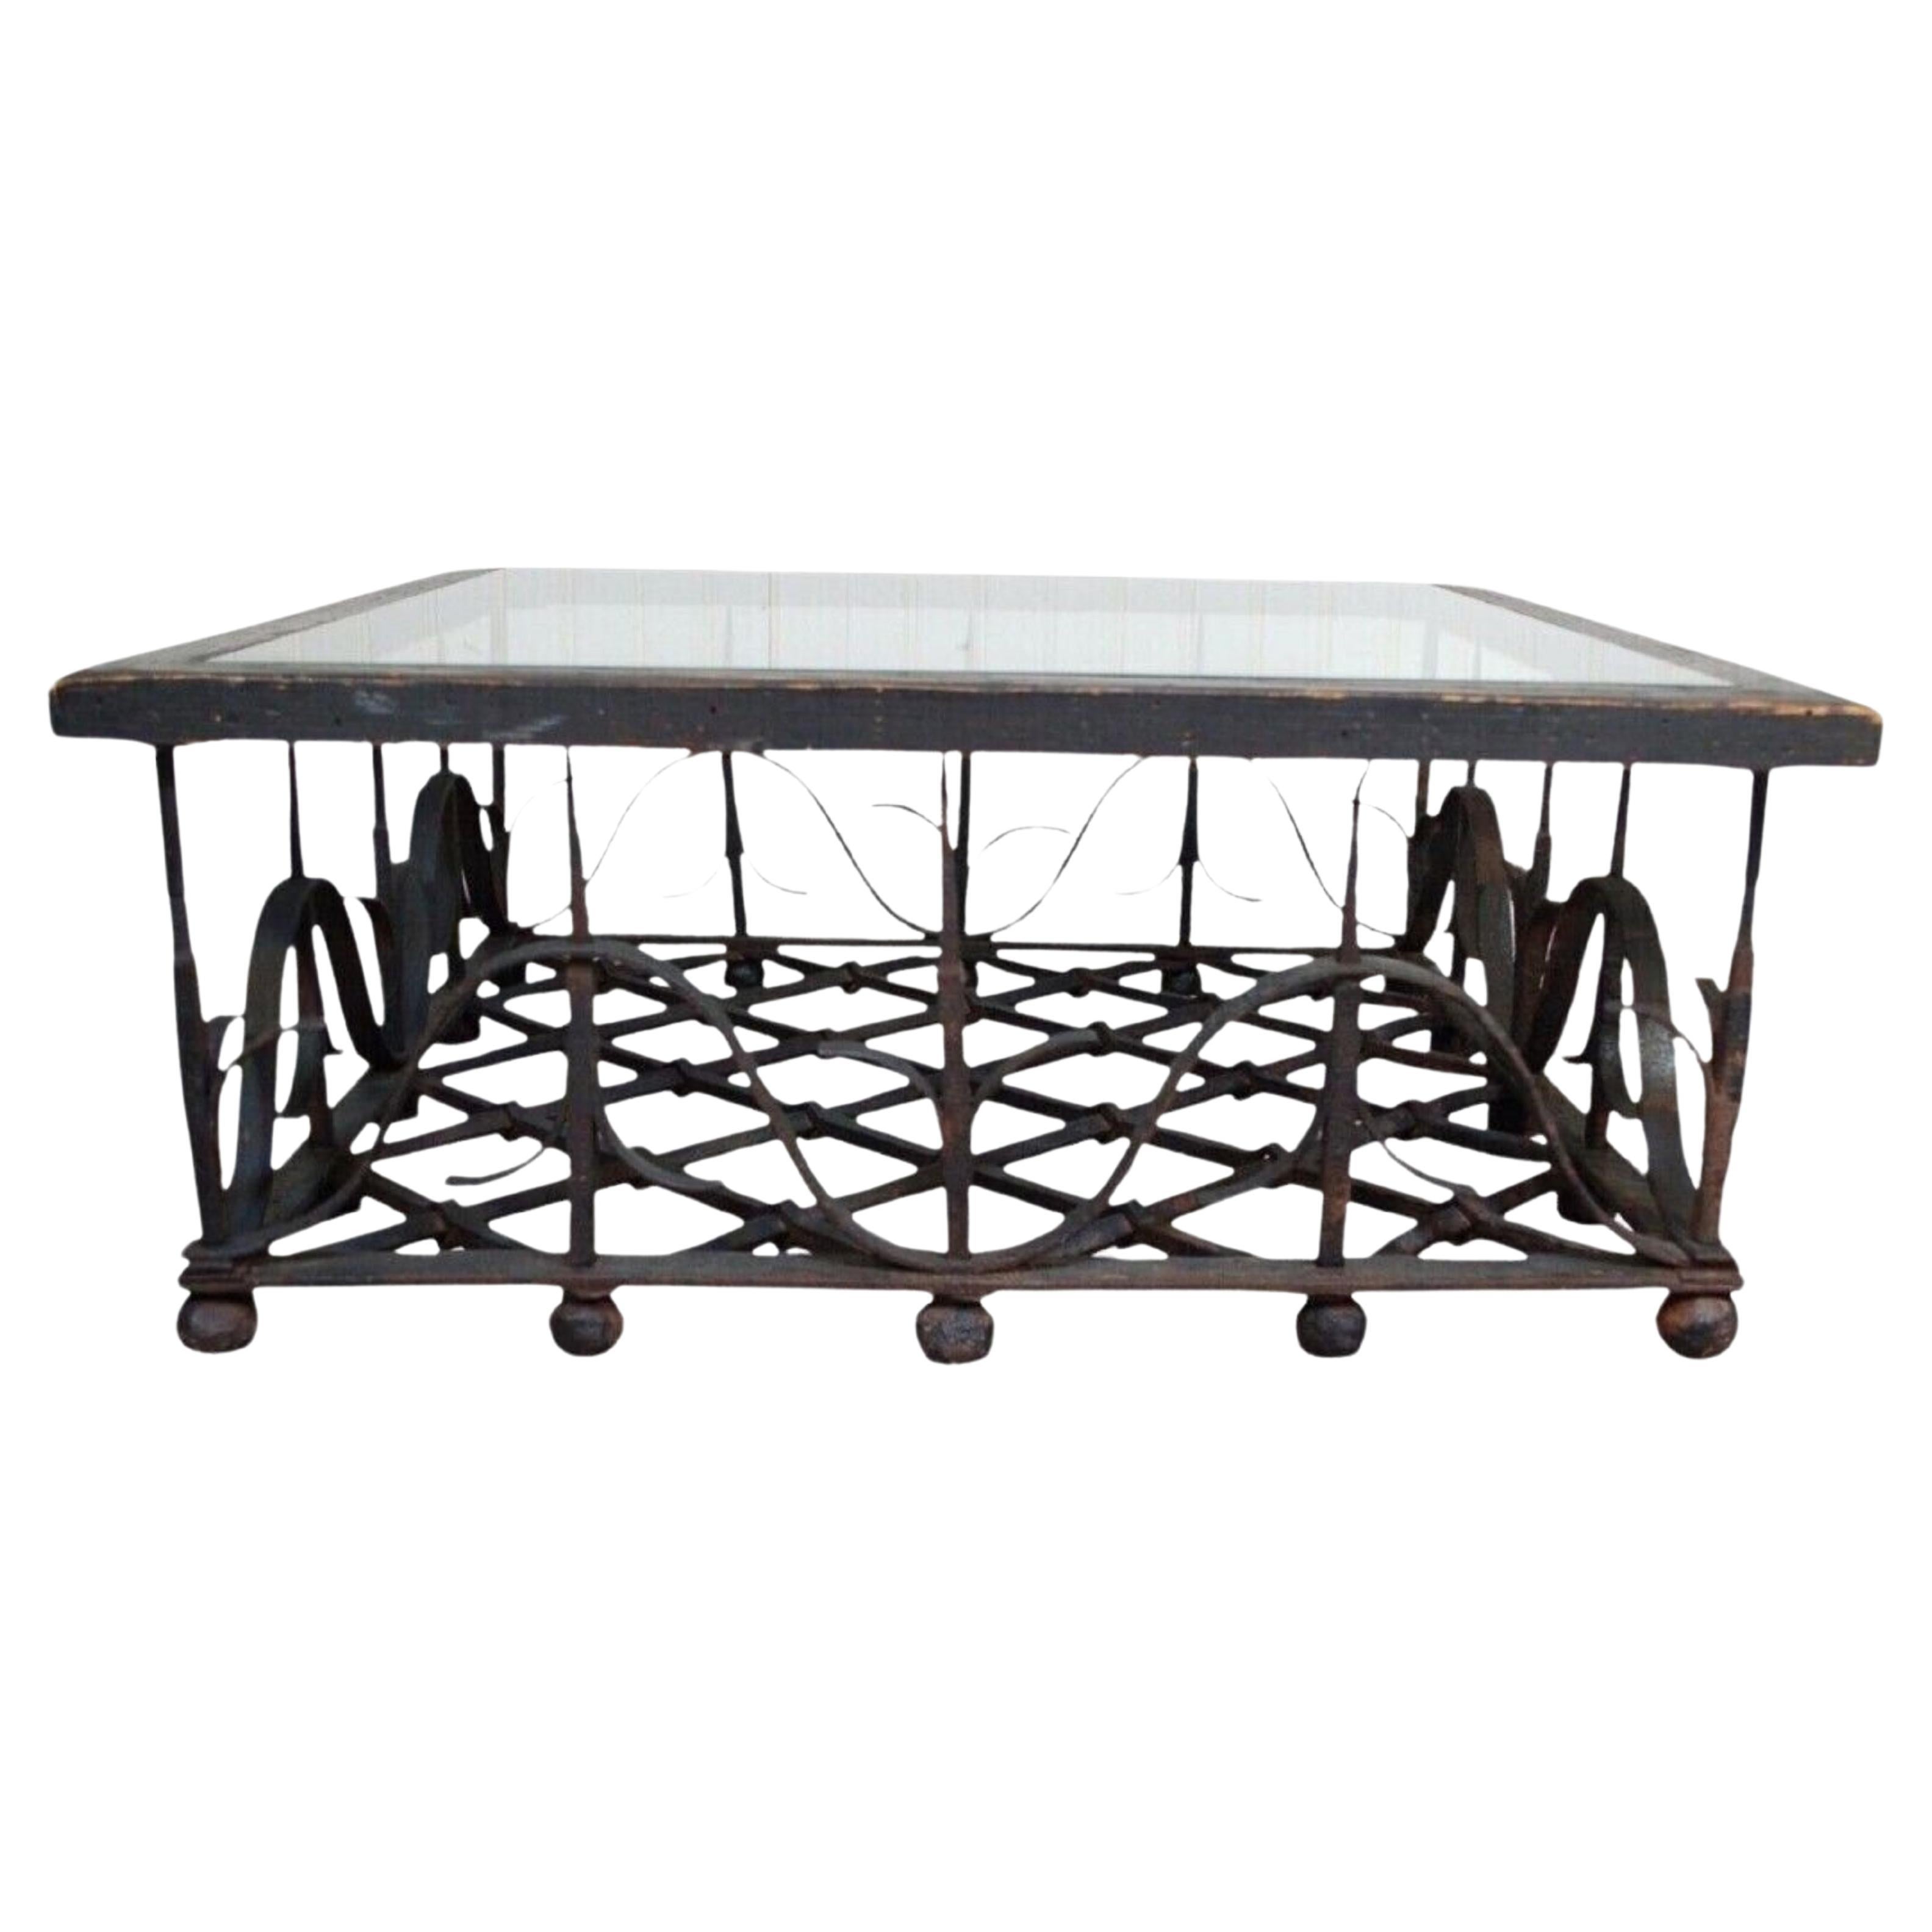 Antique Wrought Iron Mission Arts & Crafts Coffee Table Samuel Yellin Style For Sale